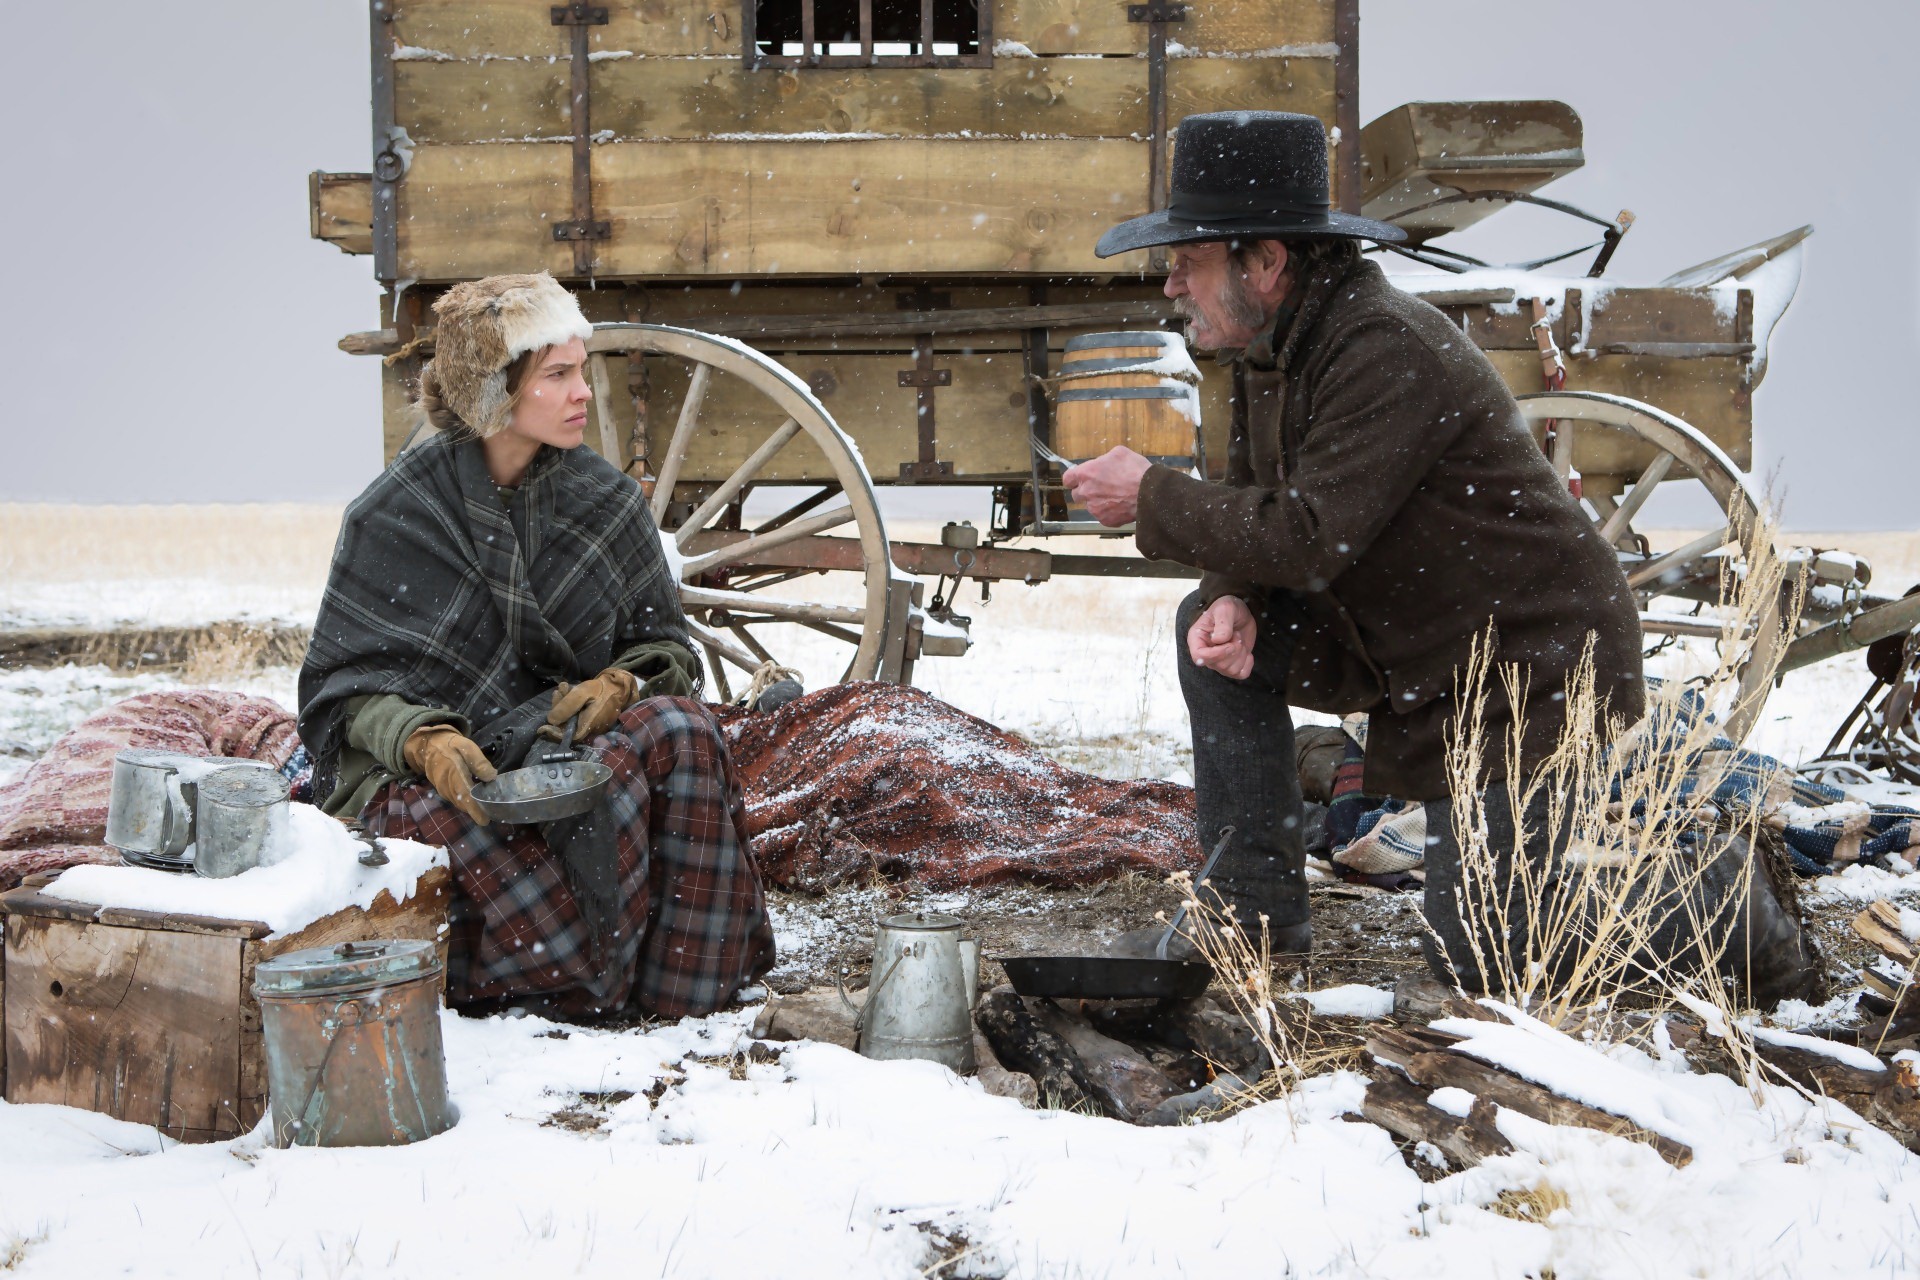 The Briscoe's 'Women of the West' Film Series Wraps up with Tommy Lee Jones'  Frontier Drama 'The Homesman' | Arts Stories & Interviews | San Antonio |  San Antonio Current